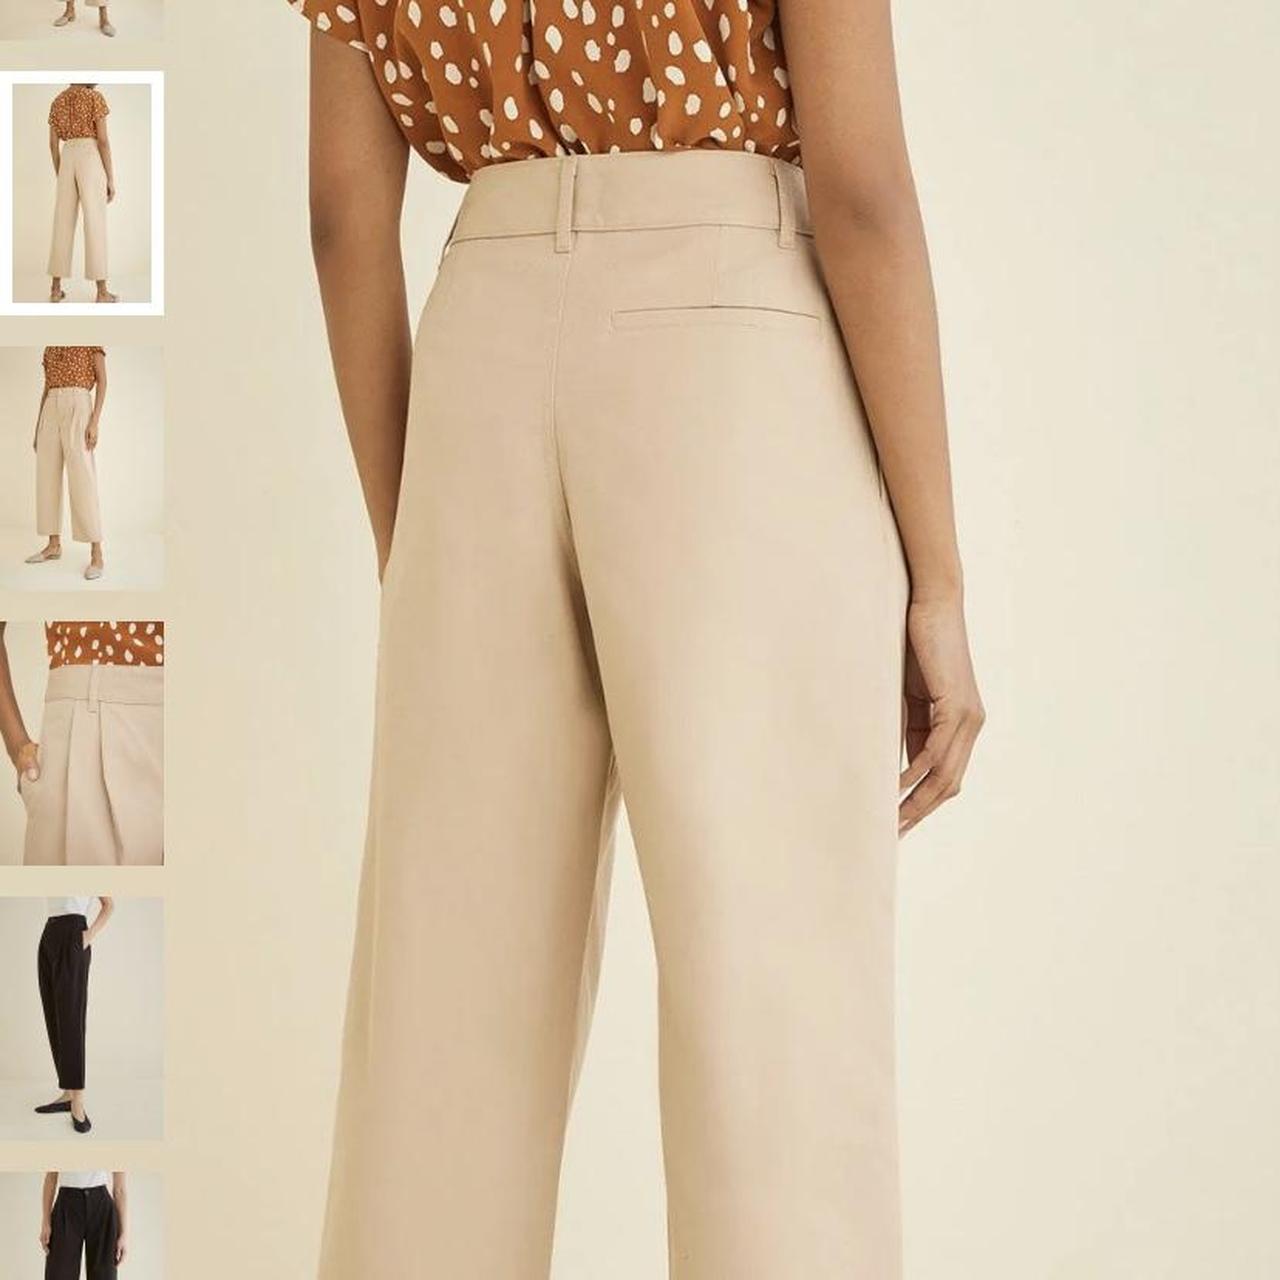 Amour Vert Women's Tan and Cream Trousers (3)